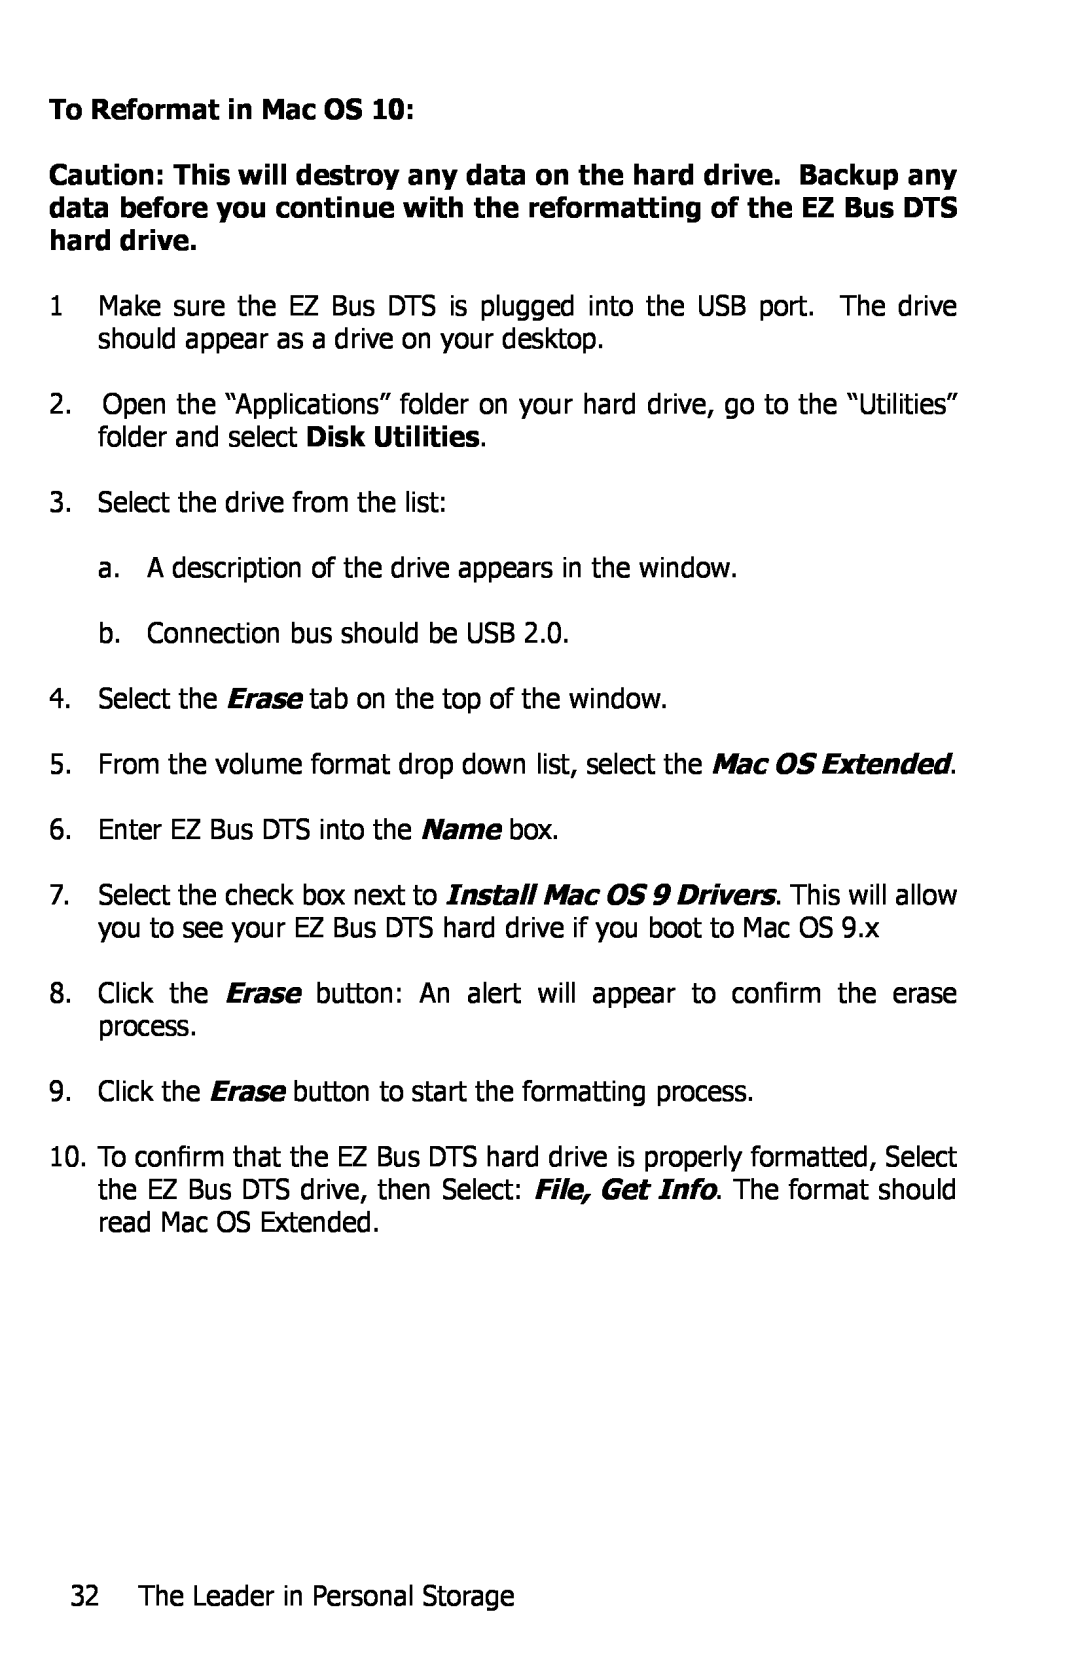 Apricorn EZ Bus DTS manual To Reformat in Mac OS, Select the drive from the list 